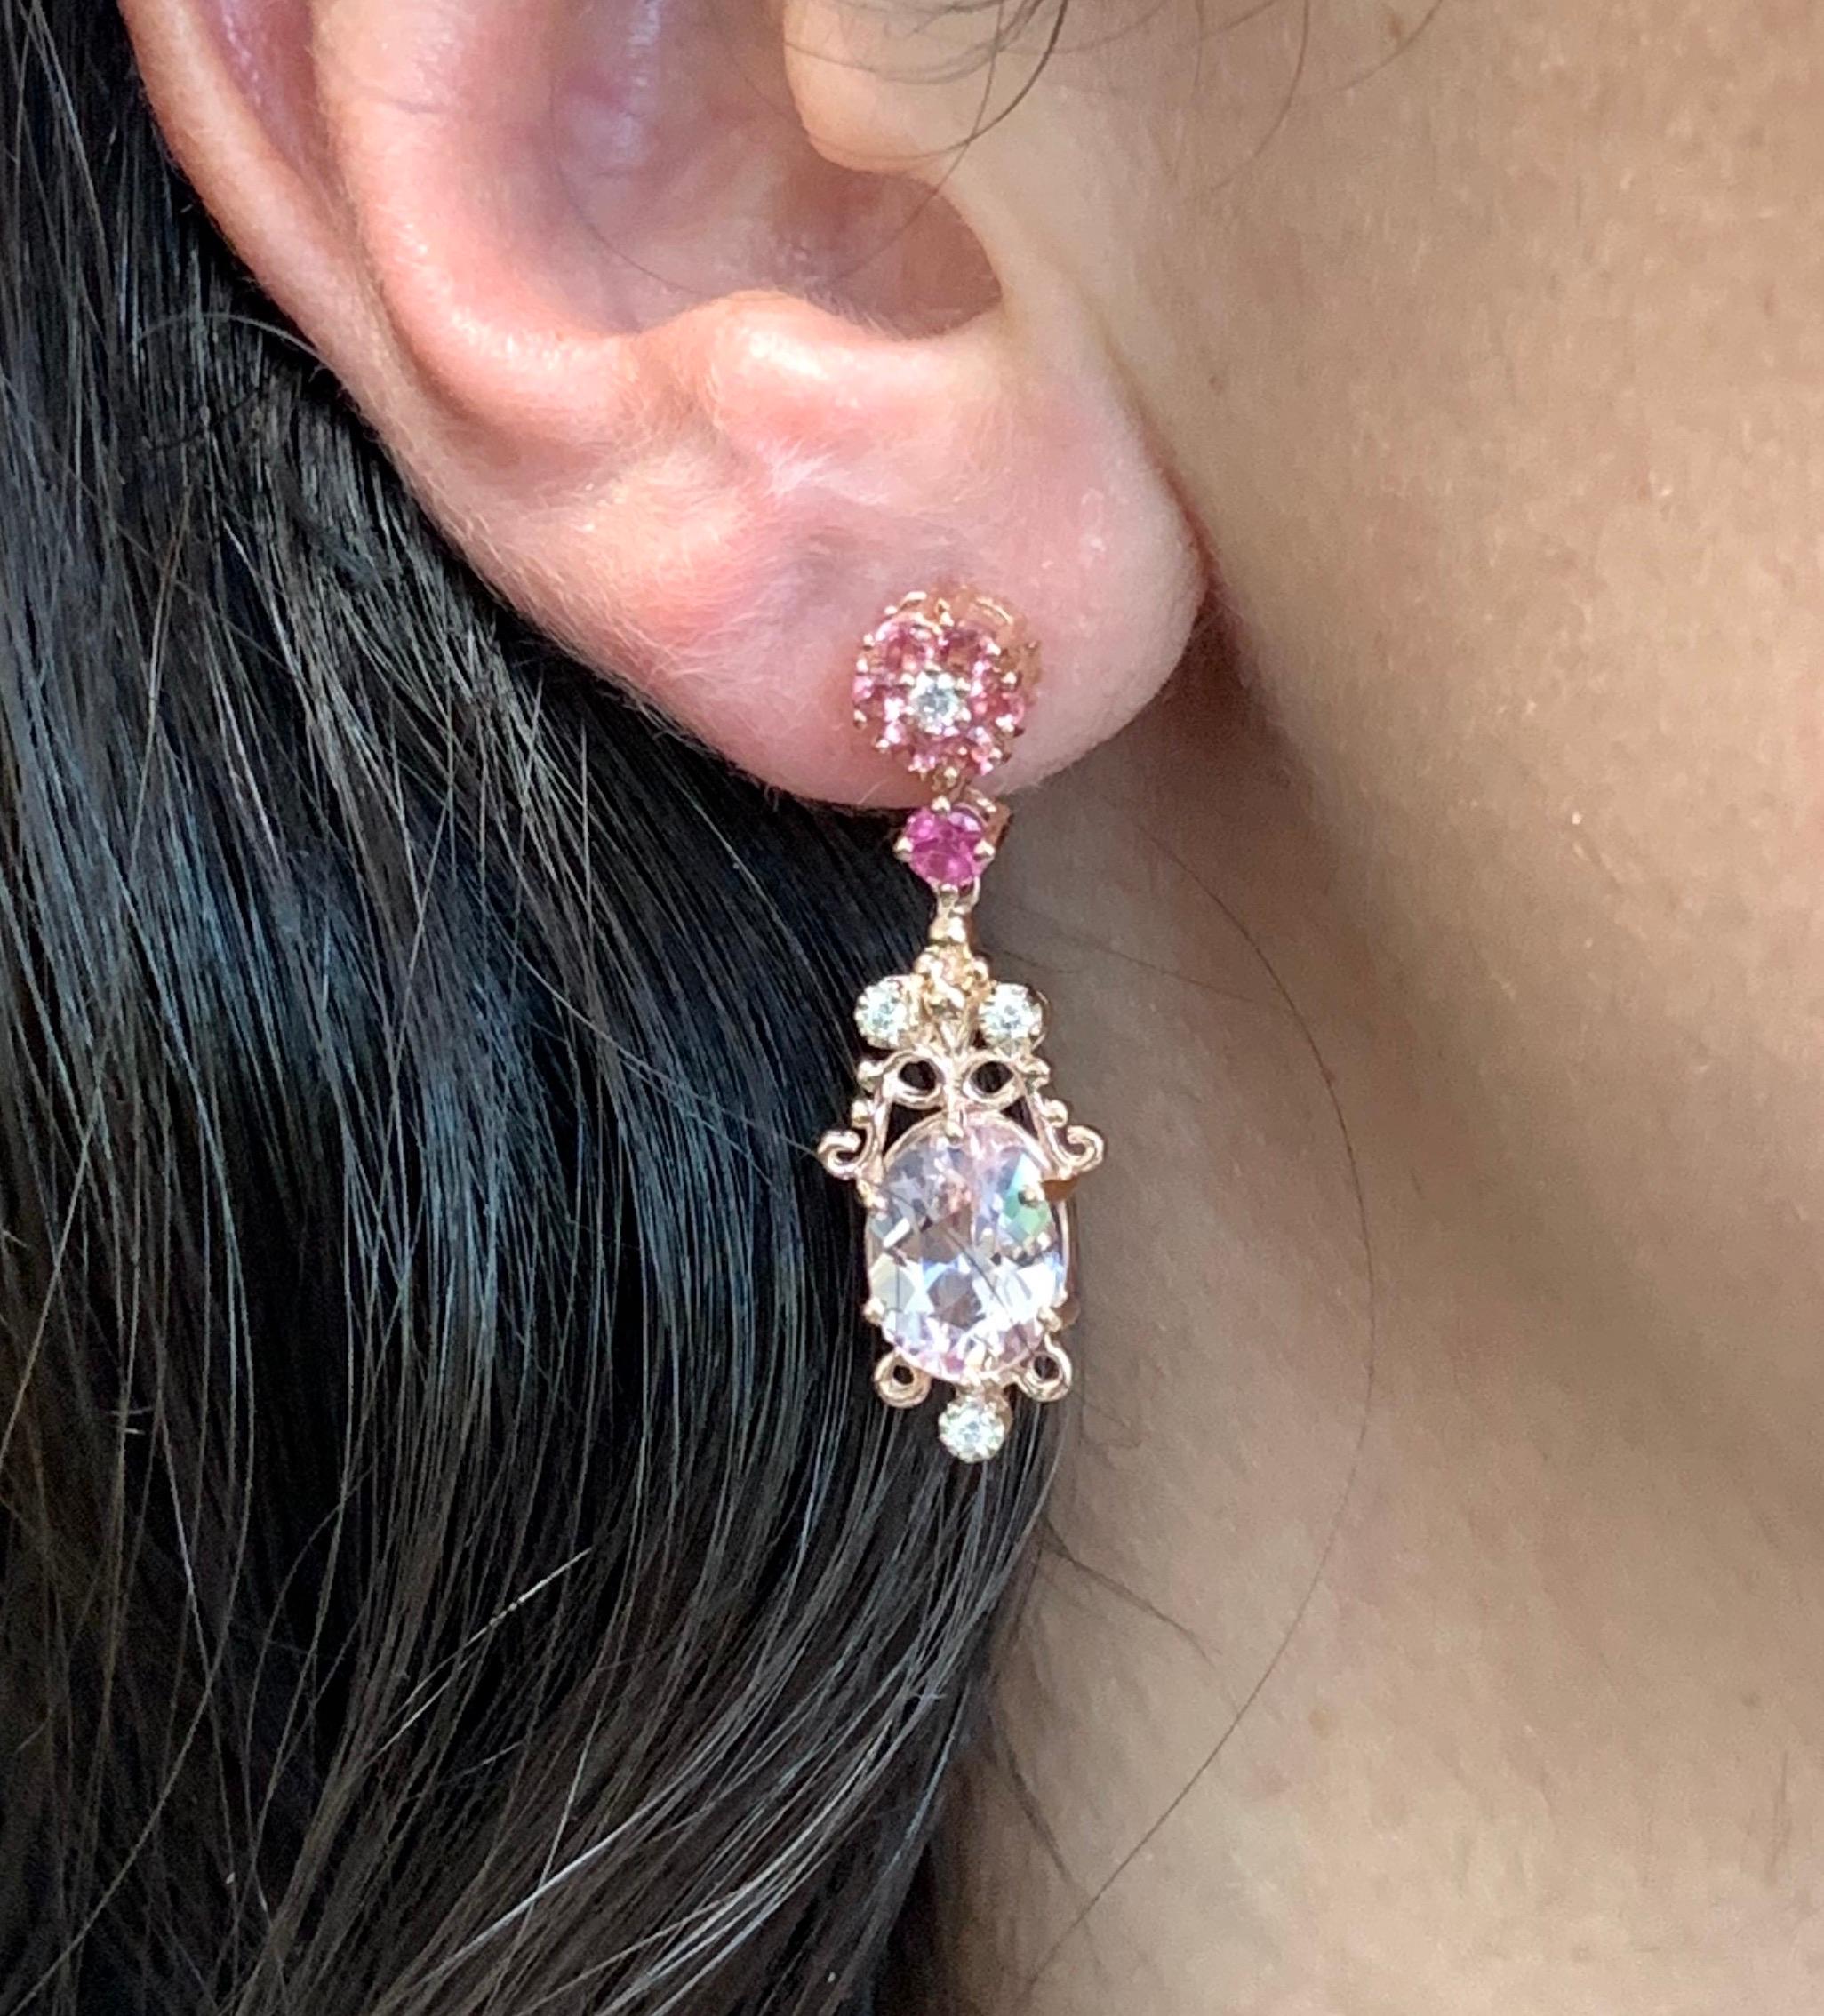 Material: 14k Rose Gold
Center Stone Details: 2 Oval Pink Morganites at 3.01 carats - Measuring 9 x 7 mm
Stone Details: 14 Pink Tourmalines at 0.65 Carats
Diamond Details: 8 Round White Diamonds at 0.17 Carats - Clarity: SI / Color: H-I

Fine